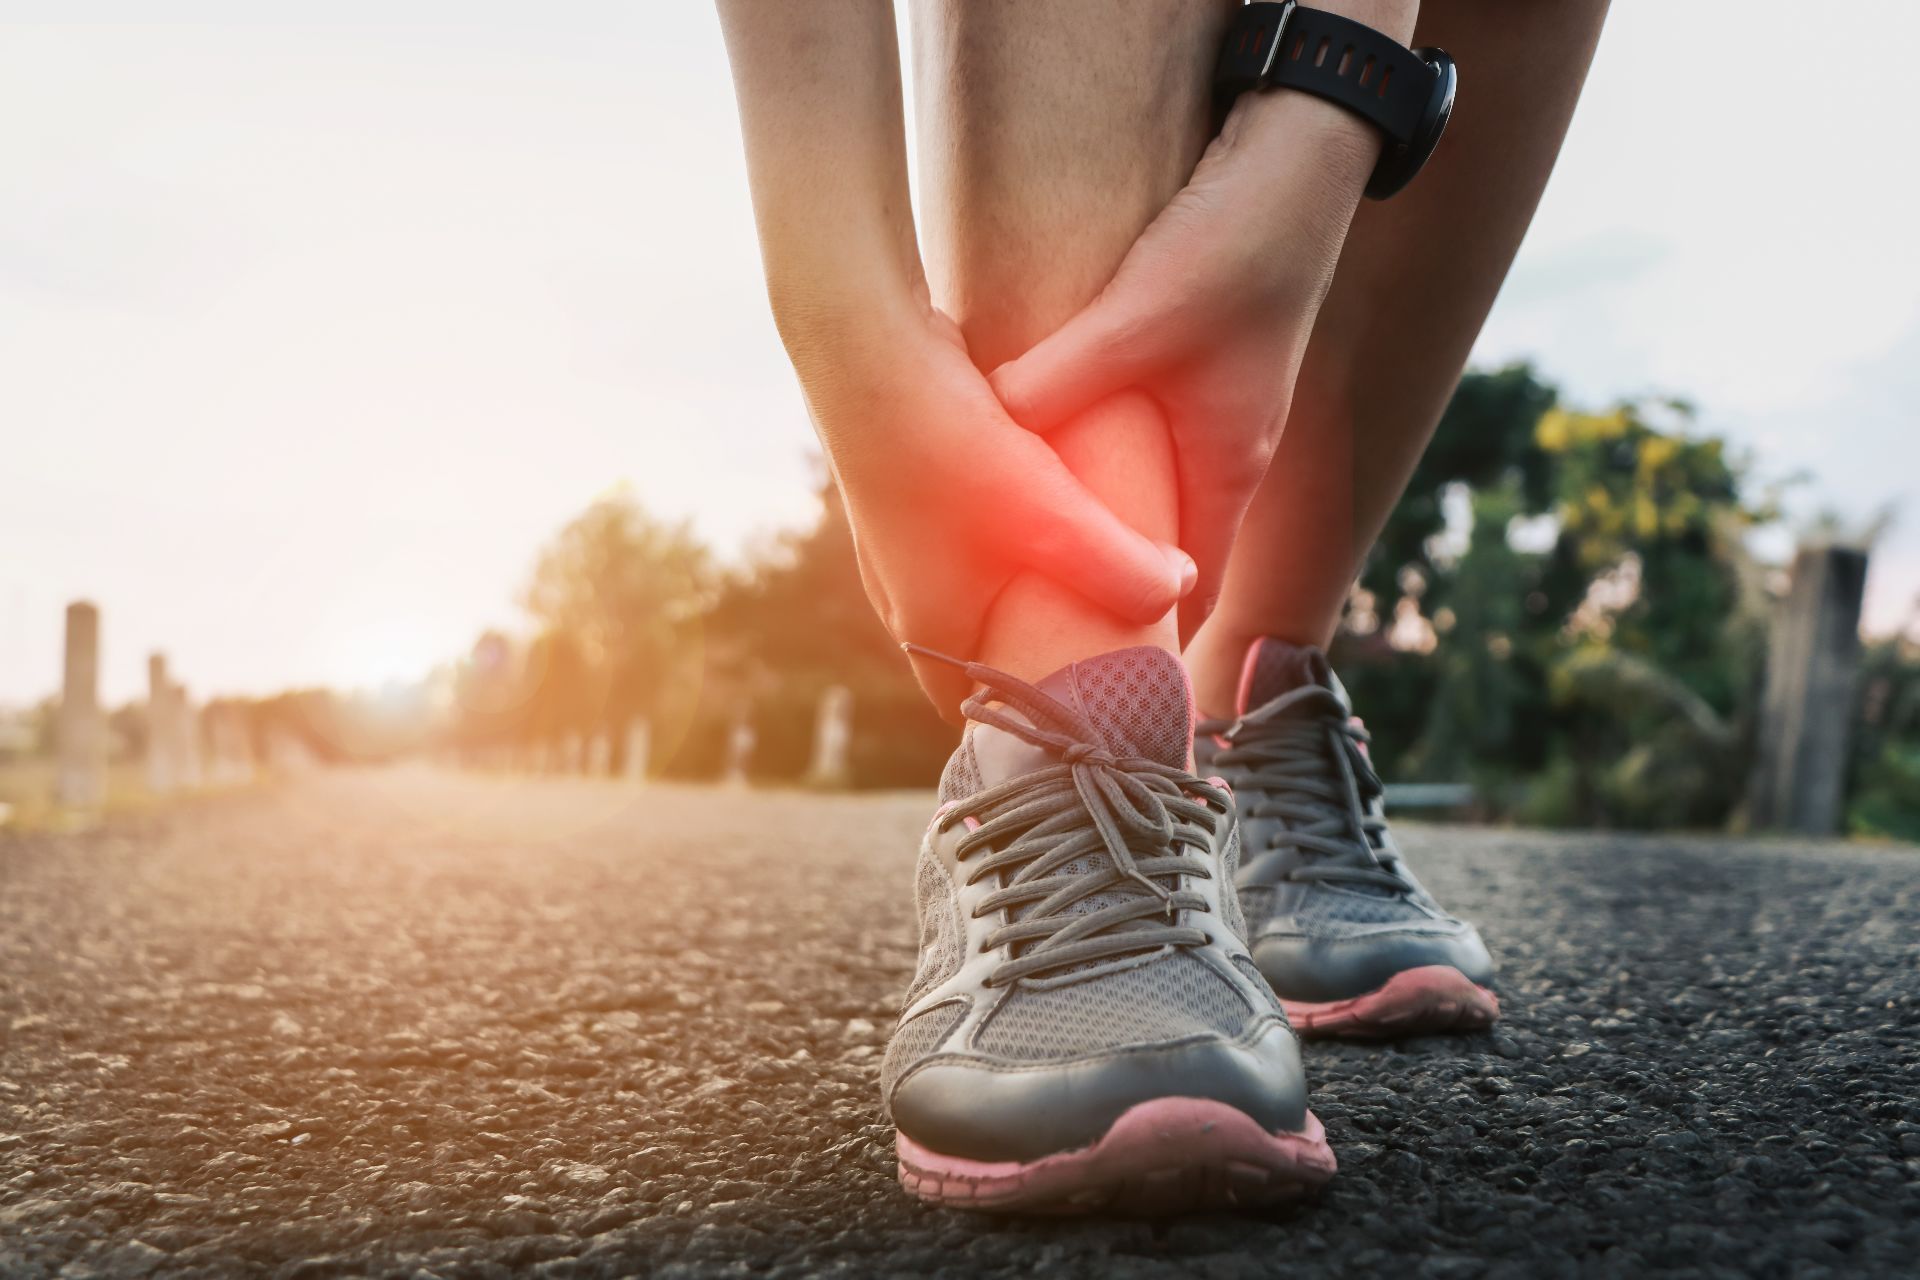 How previous injuries can impact your joints